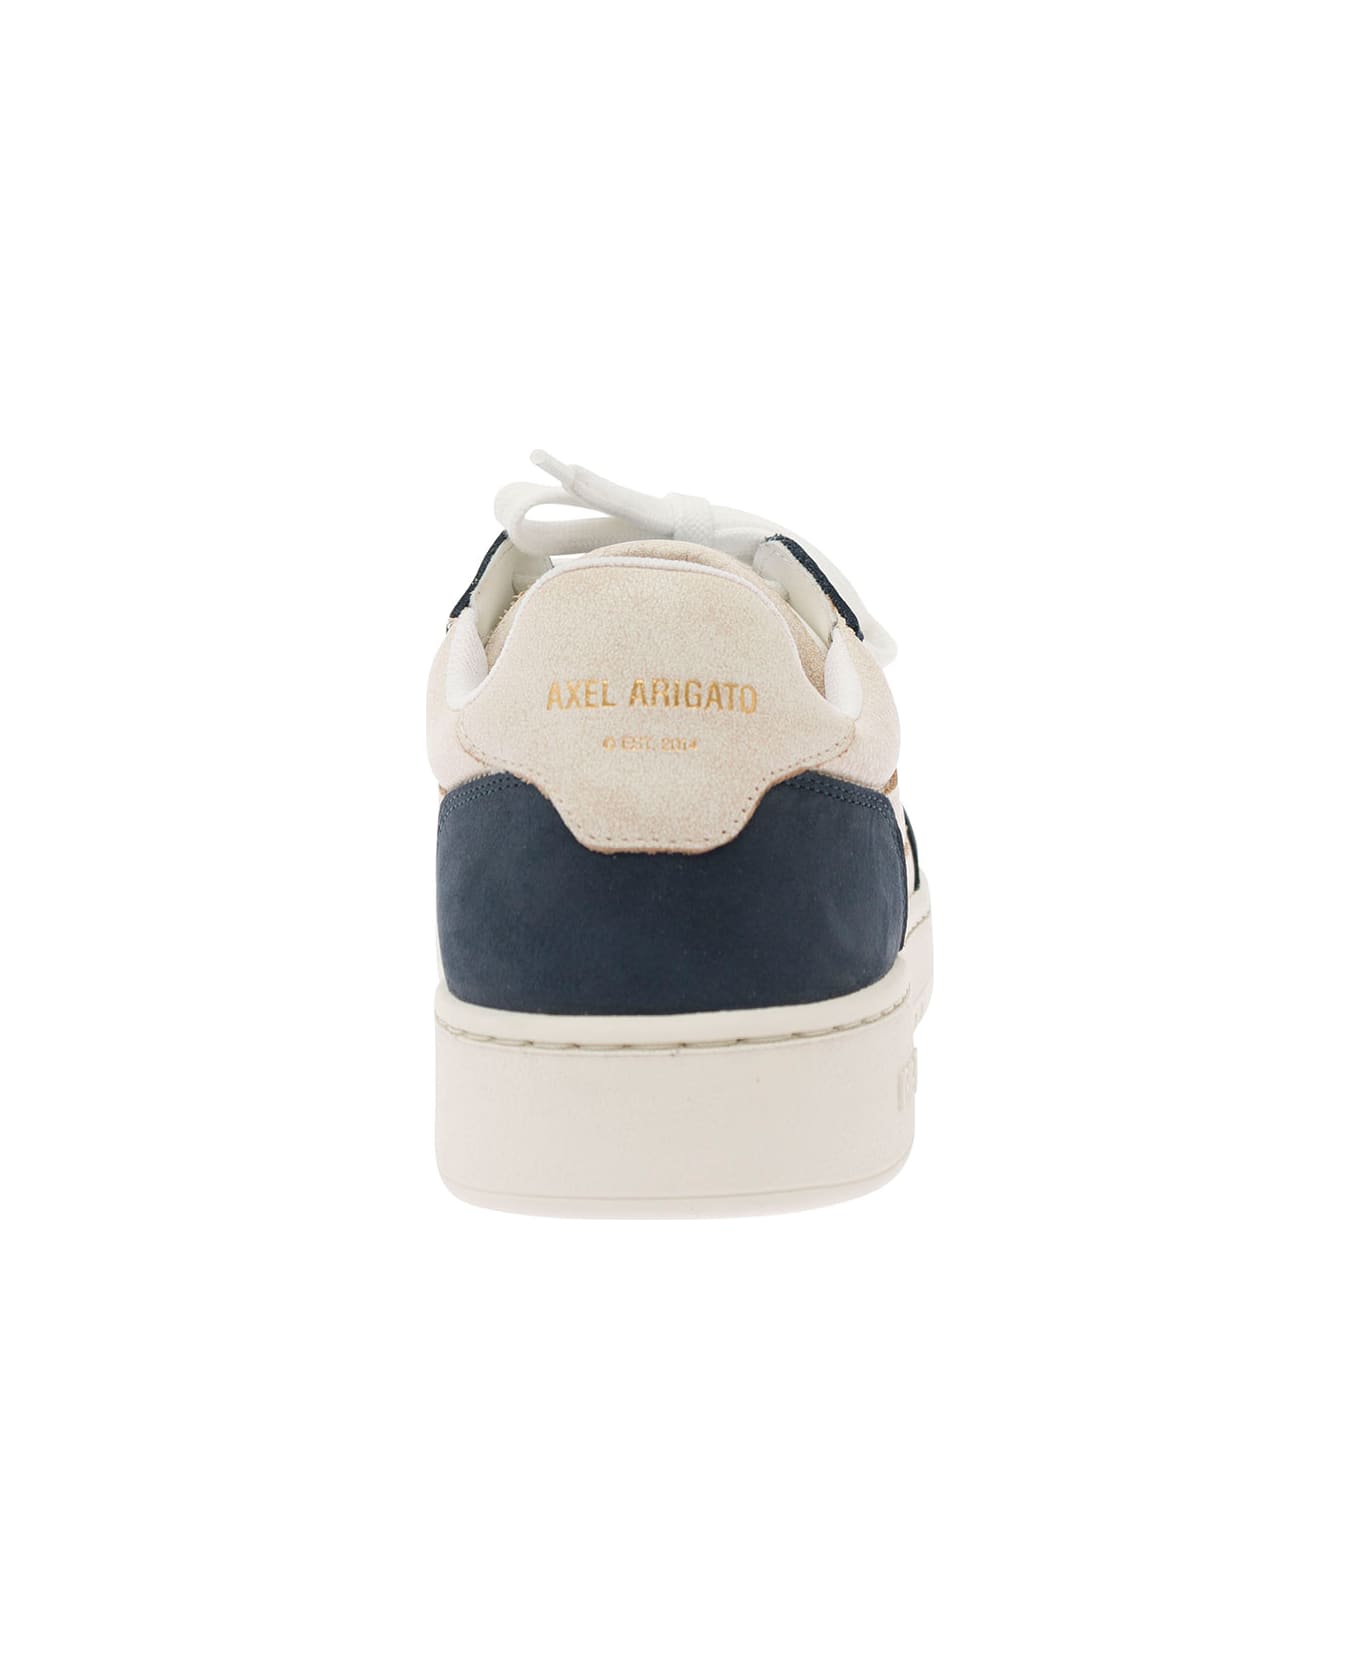 Axel Arigato 'dice Lo' Blue And White Two-tone Sneakers In Calf Leather Man - White